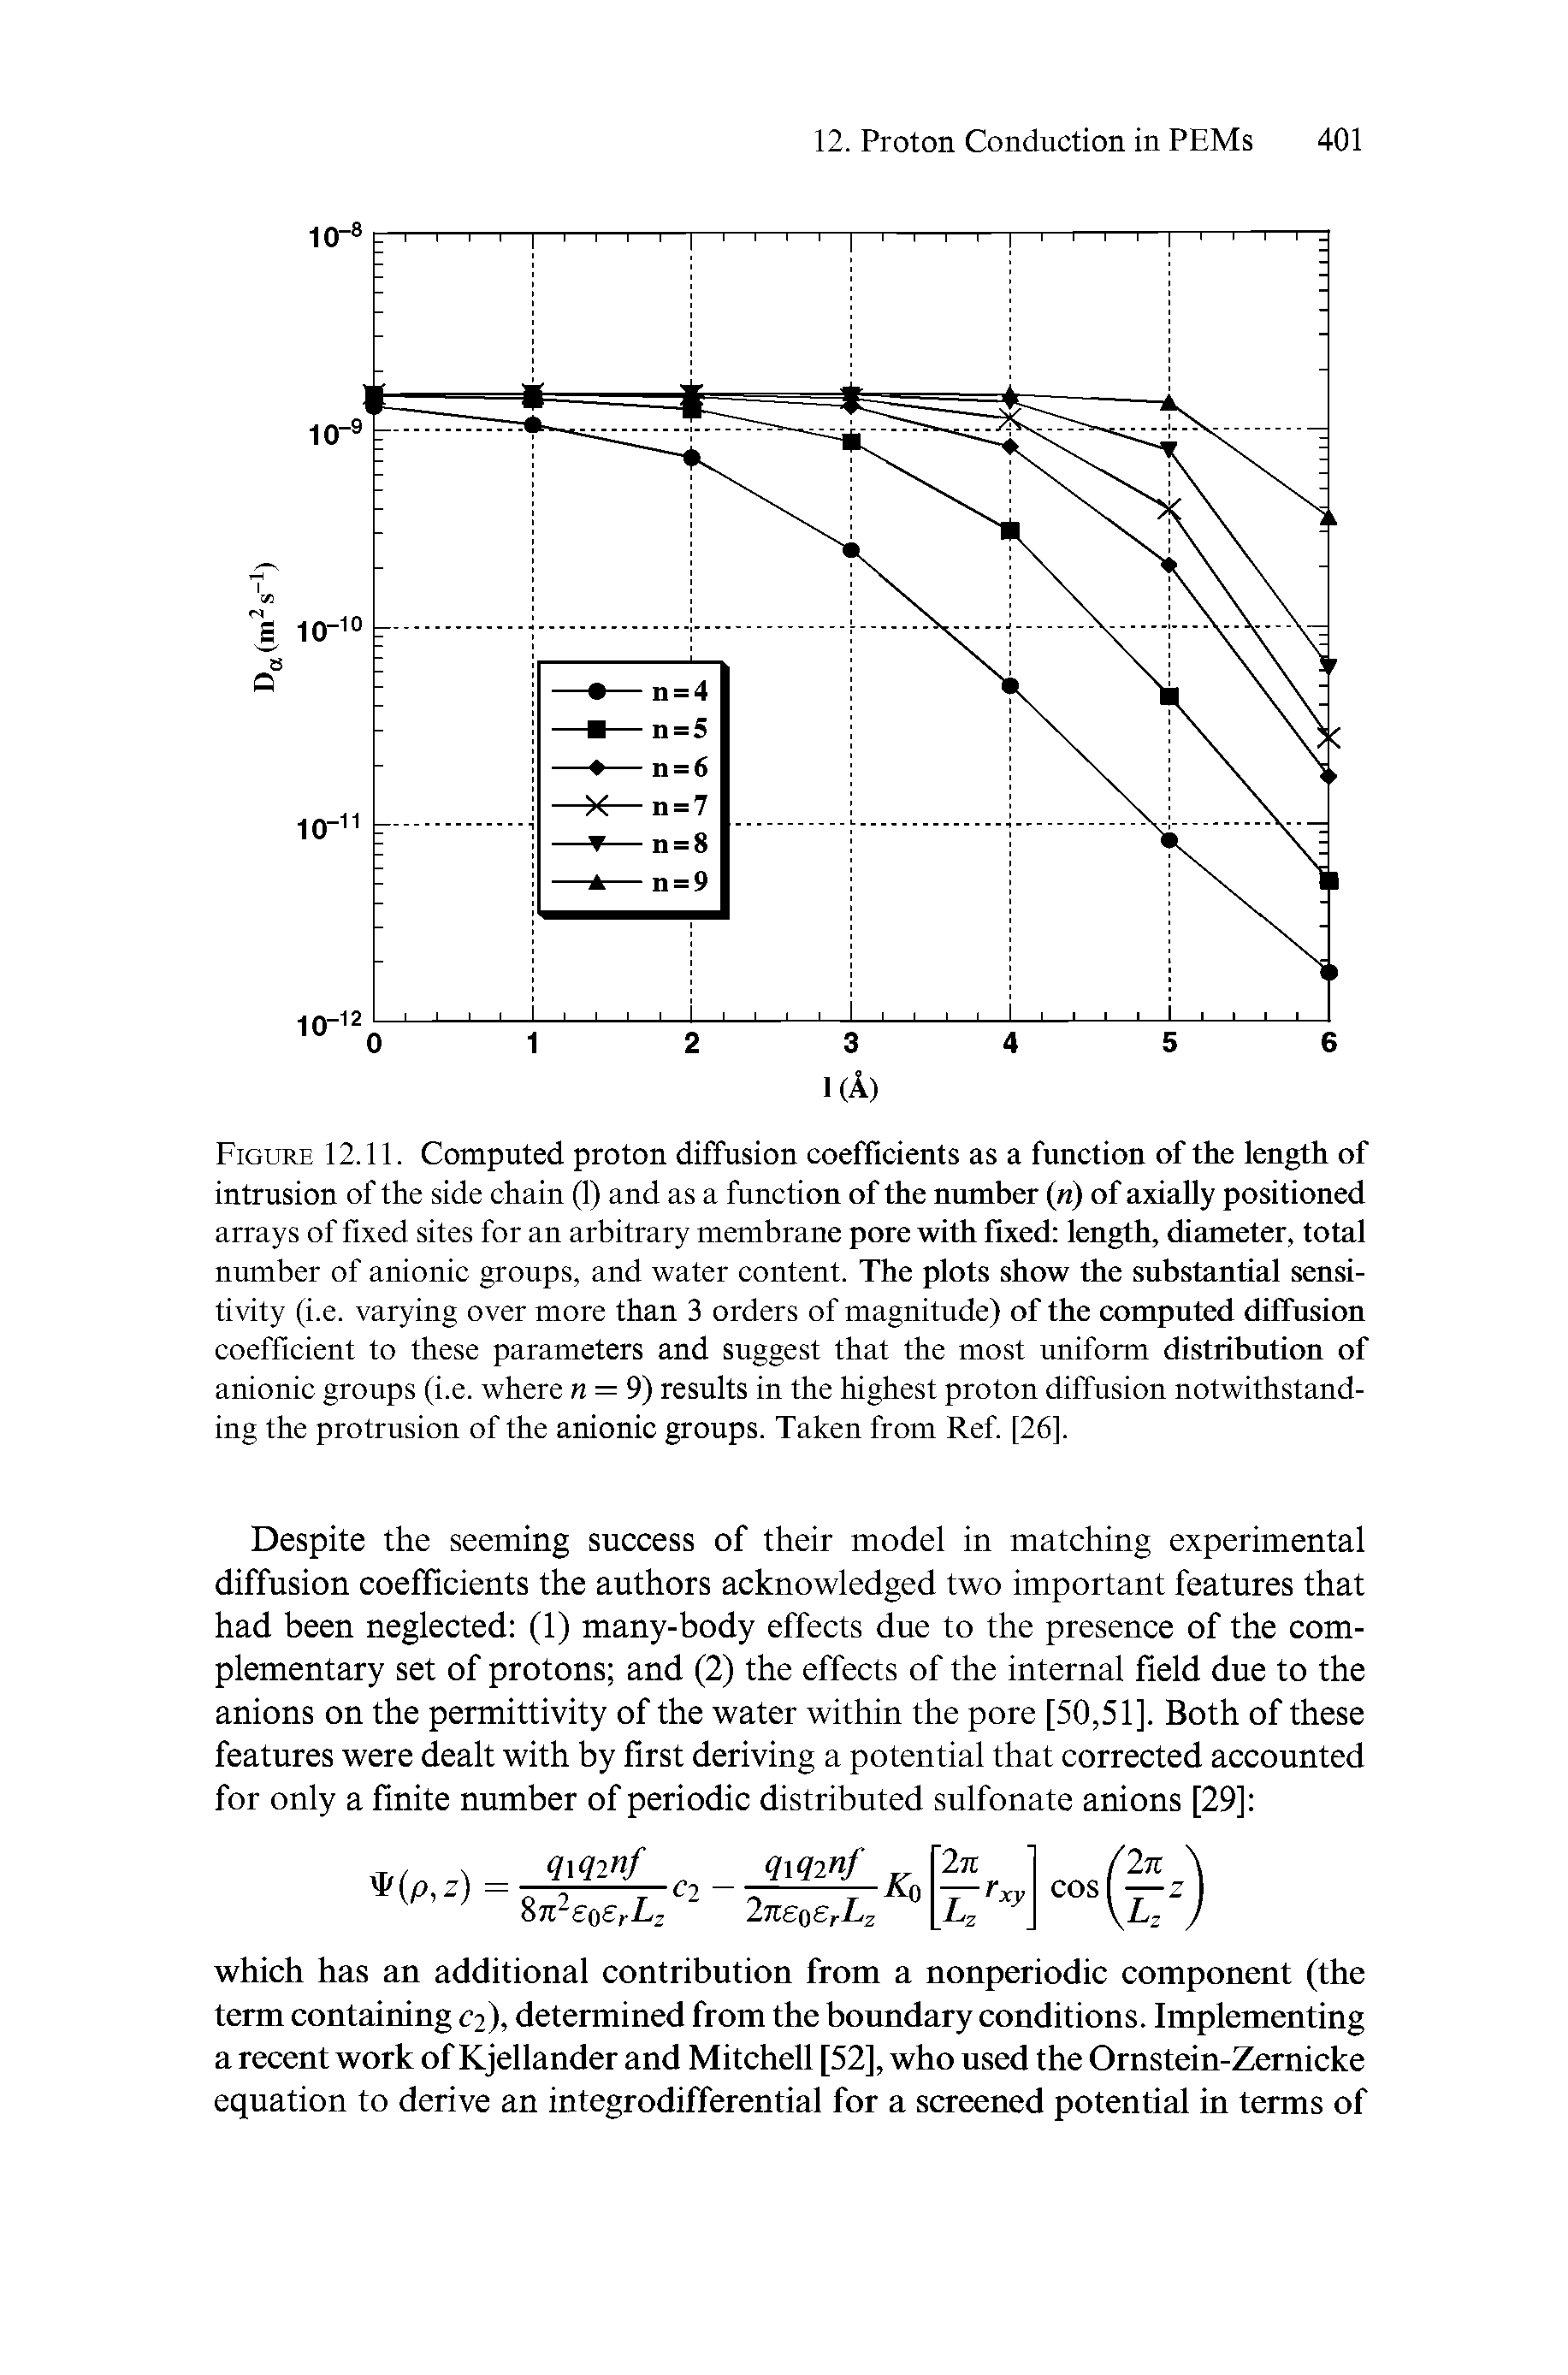 Figure 12.11. Computed proton diffusion coefficients as a function of the length of intrusion of the side chain (1) and as a function of the number ( ) of axially positioned arrays of fixed sites for an arbitrary membrane pore with fixed length, diameter, total number of anionic groups, and water content. The plots show the substantial sensitivity (i.e. varying over more than 3 orders of magnitude) of the computed diffusion coefficient to these parameters and suggest that the most uniform distribution of anionic groups (i.e. where = 9) results in the highest proton diffusion notwithstanding the protrusion of the anionic groups. Taken from Ref. [26].